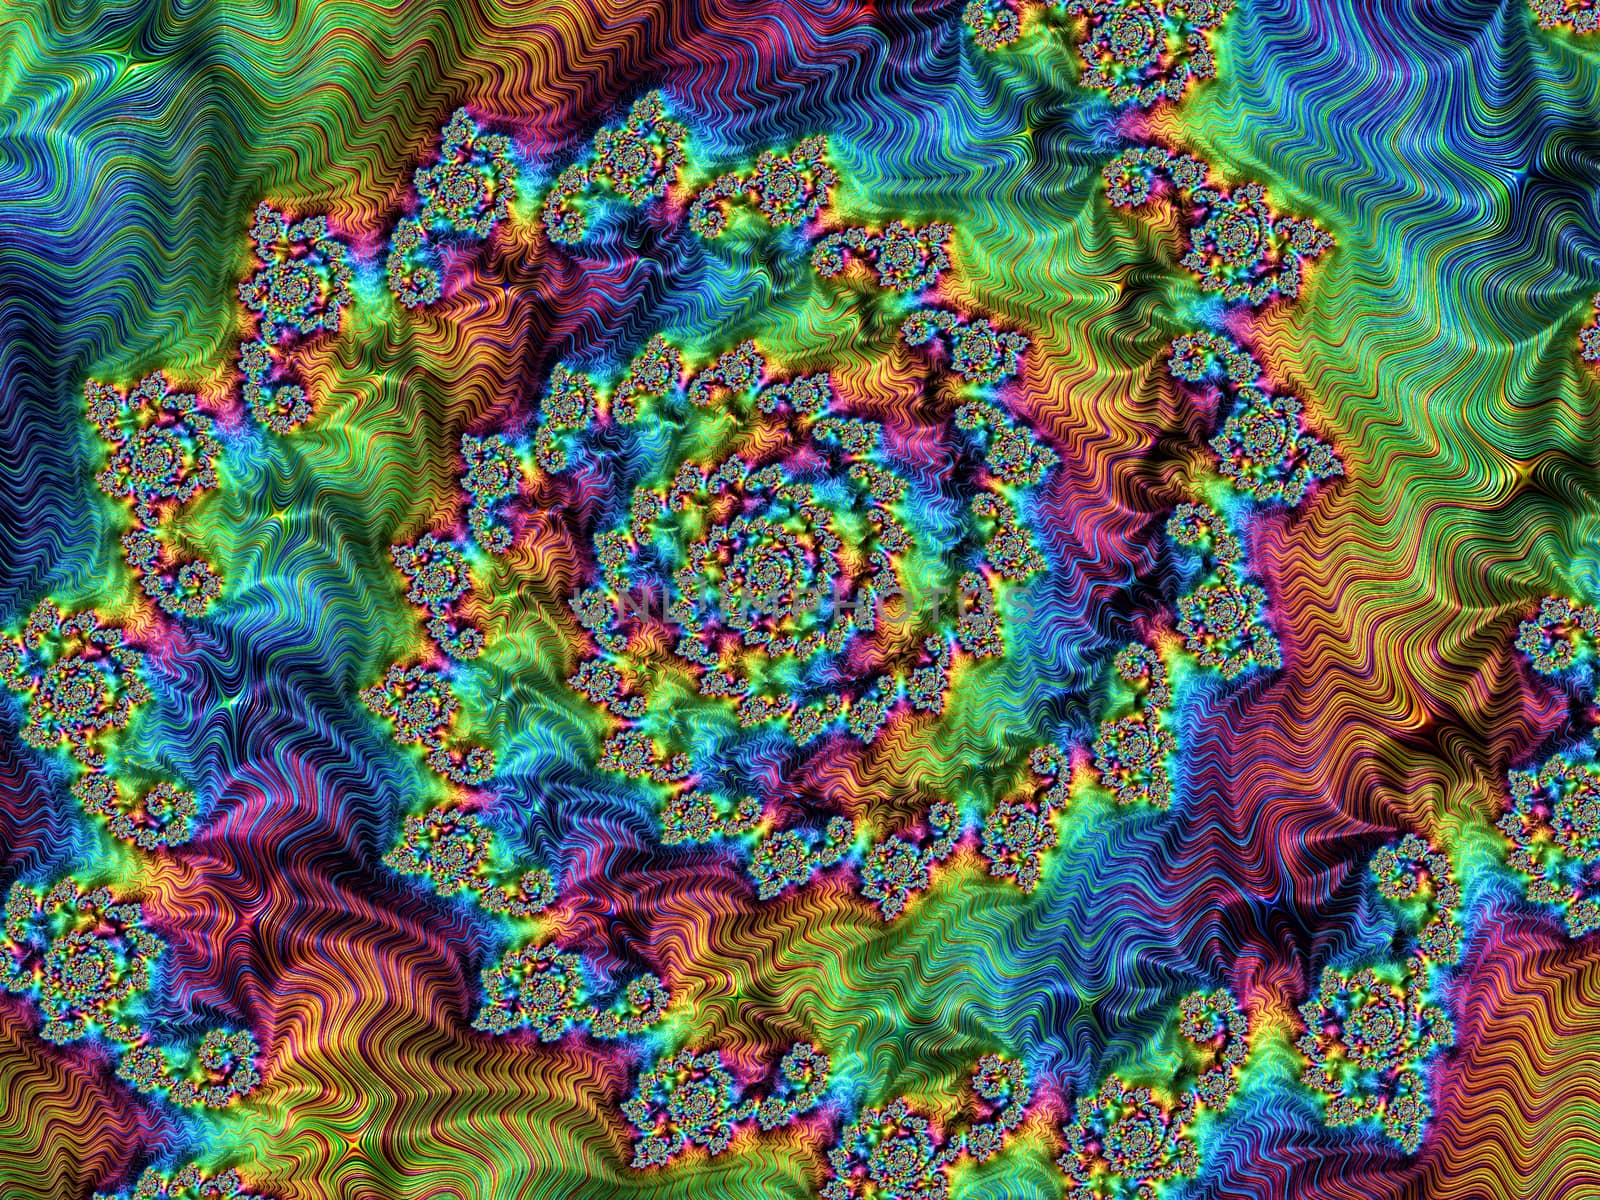 Abstract fractal spiral - digitally generated image by olgasalt